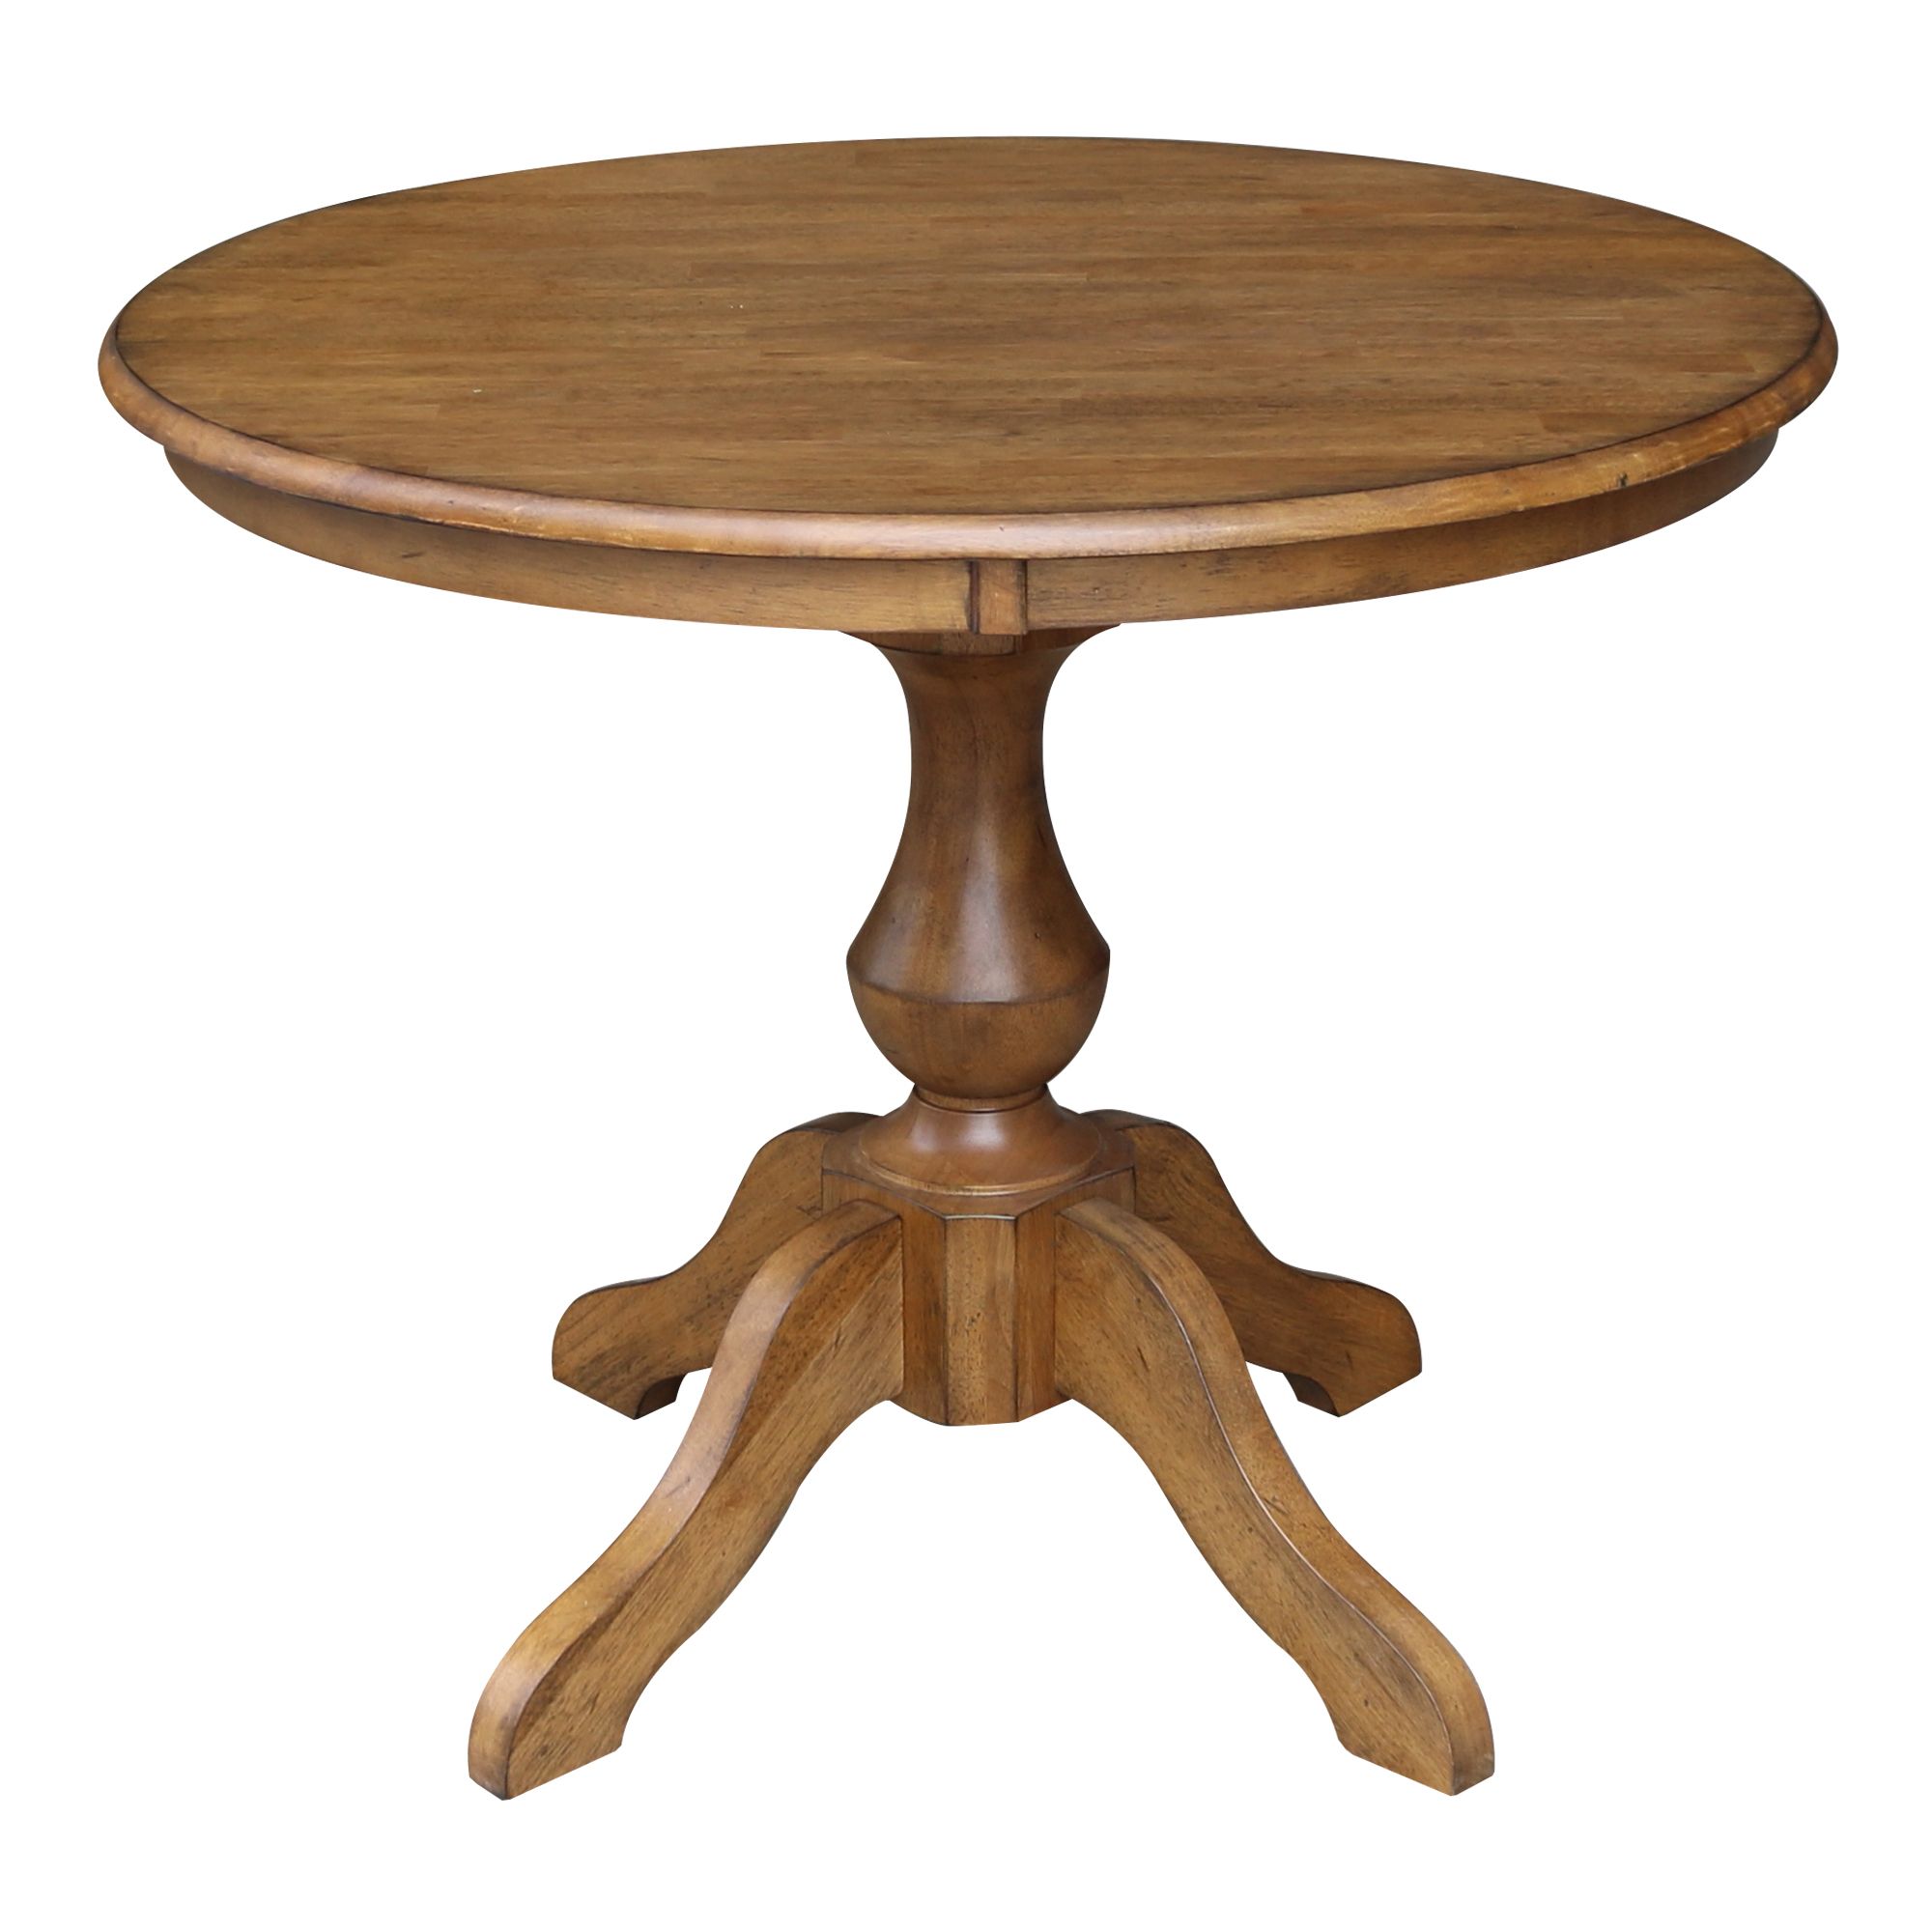 2020 Round Pedestal Dining Tables With One Leaf Pertaining To 36" Round Pedestal Dining Table – Pecan – Walmart (View 2 of 20)